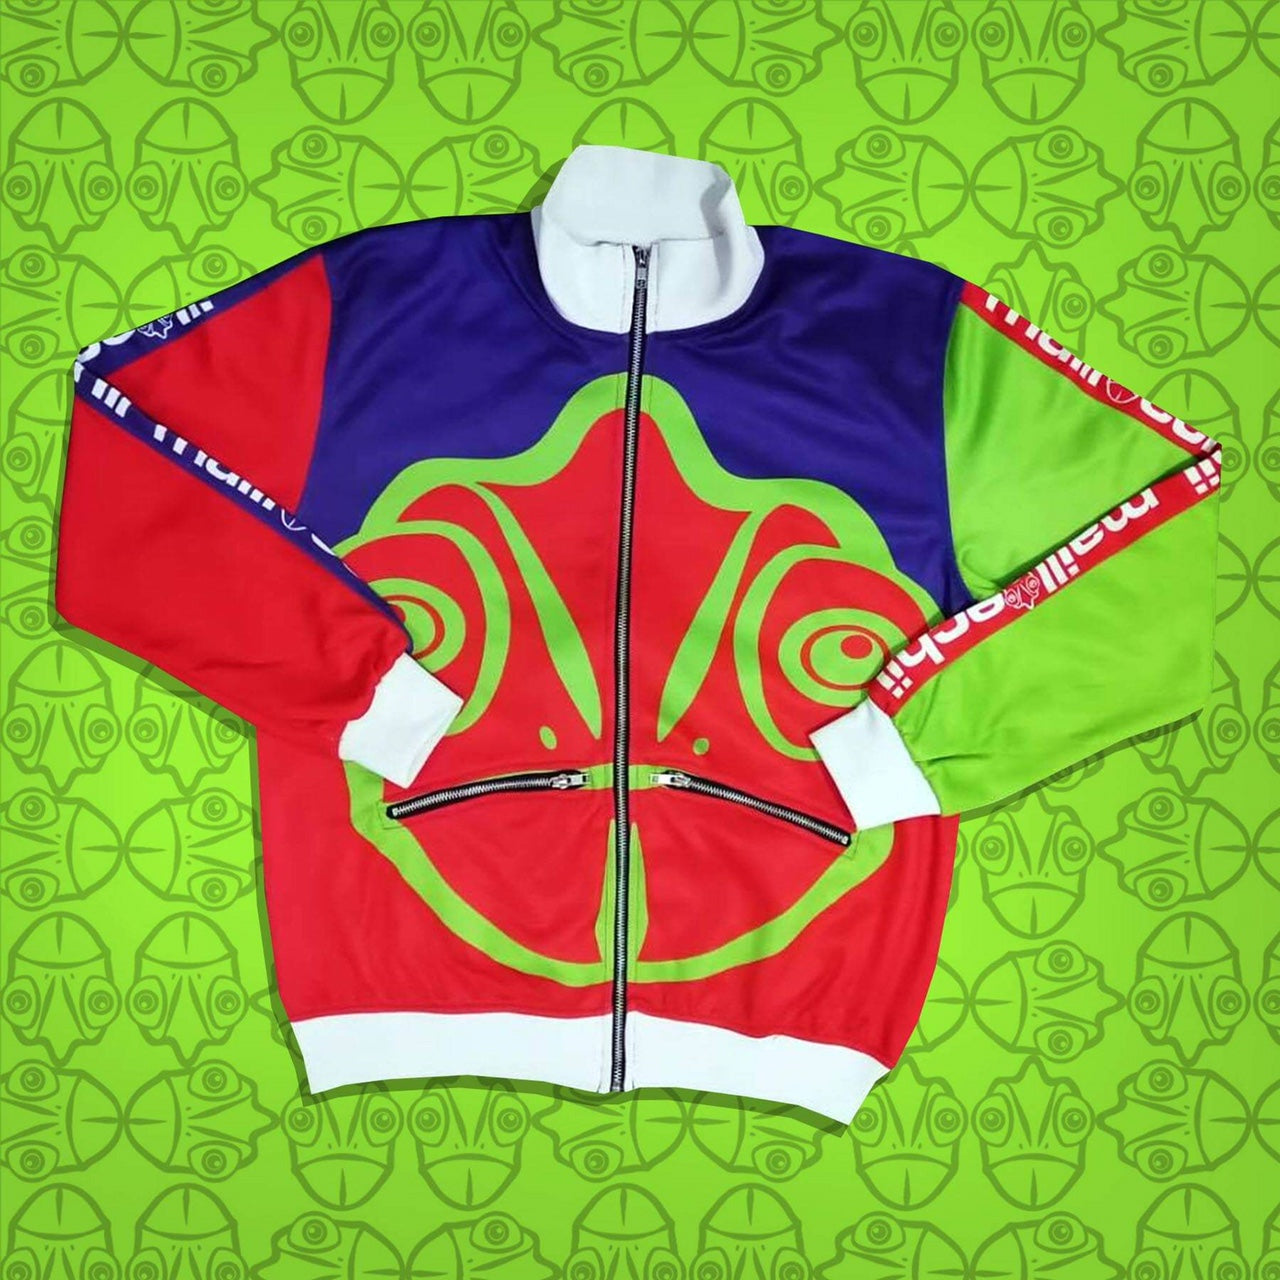 Chameleon Colors Track Suit: Red Purple Lime